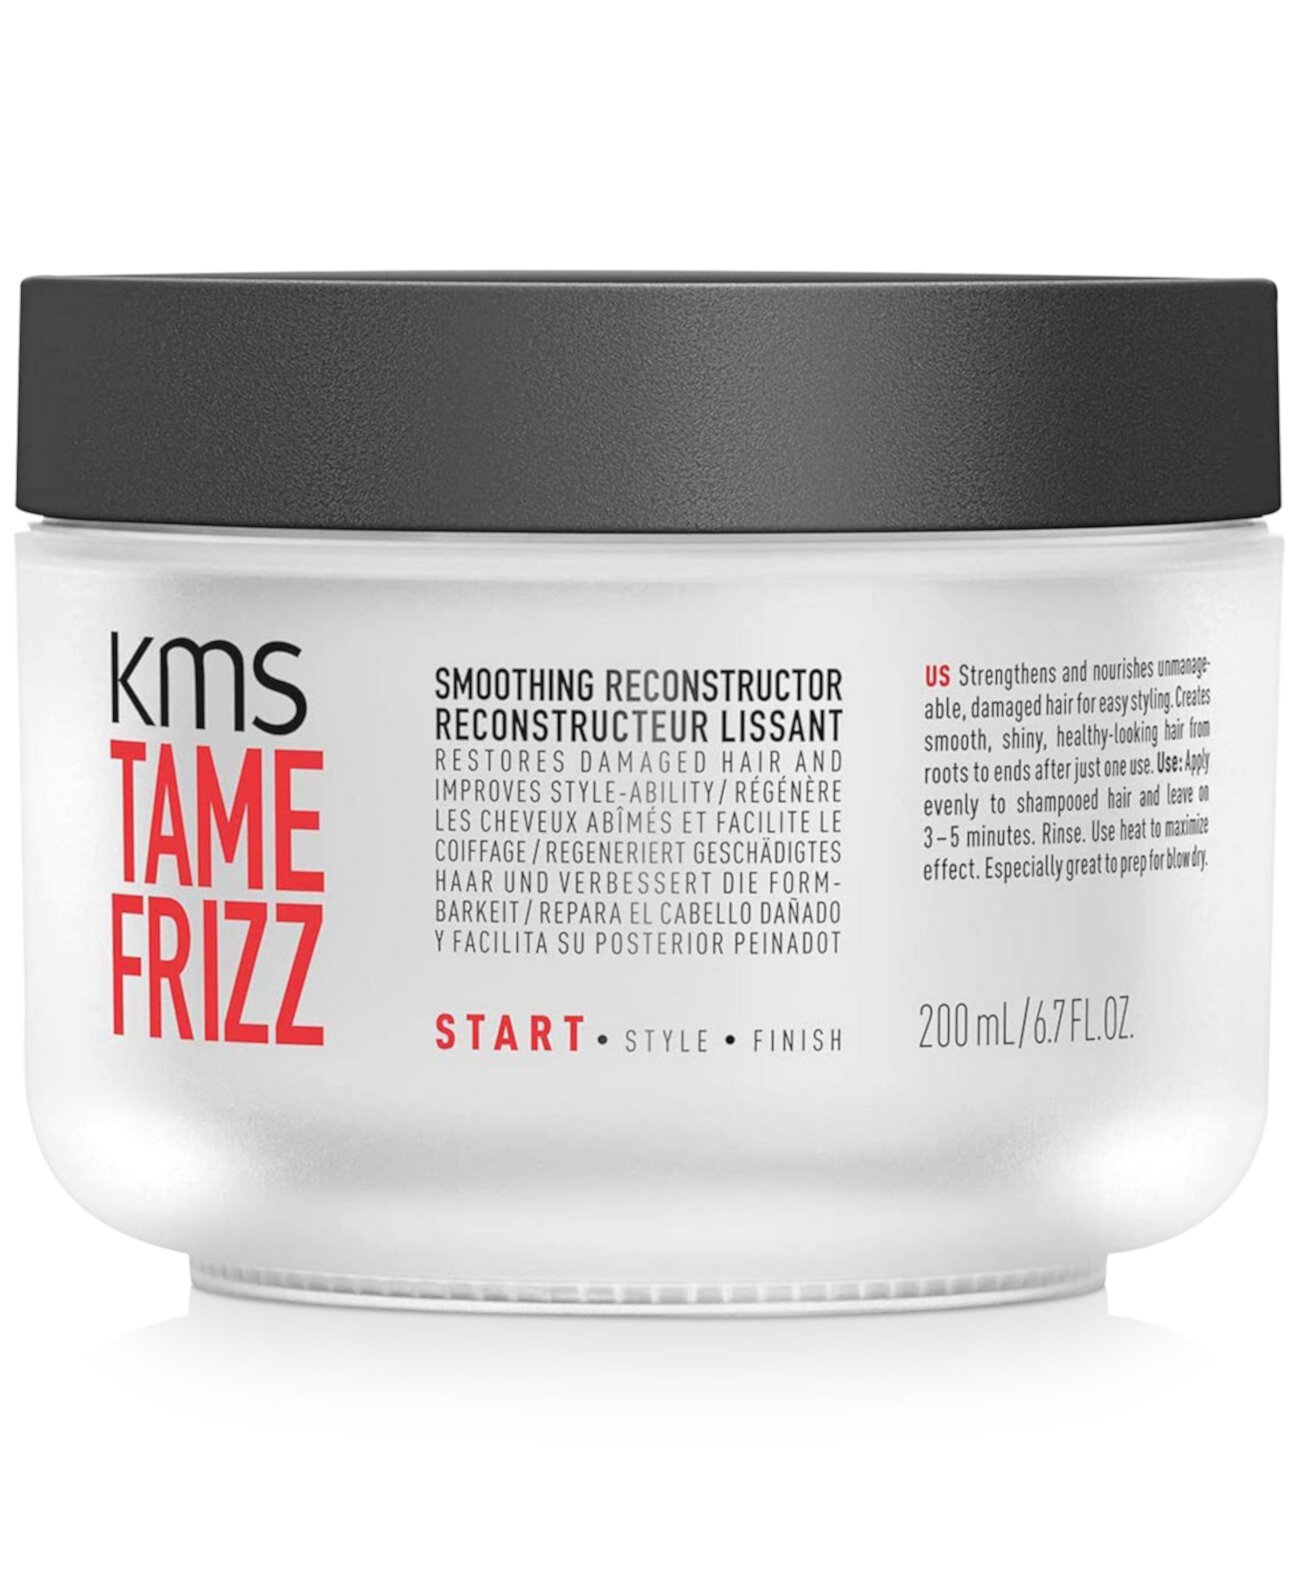 Tame Frizz Smoothing Reconstructor, 6,7 унций, от PUREBEAUTY Salon & Spa KMS